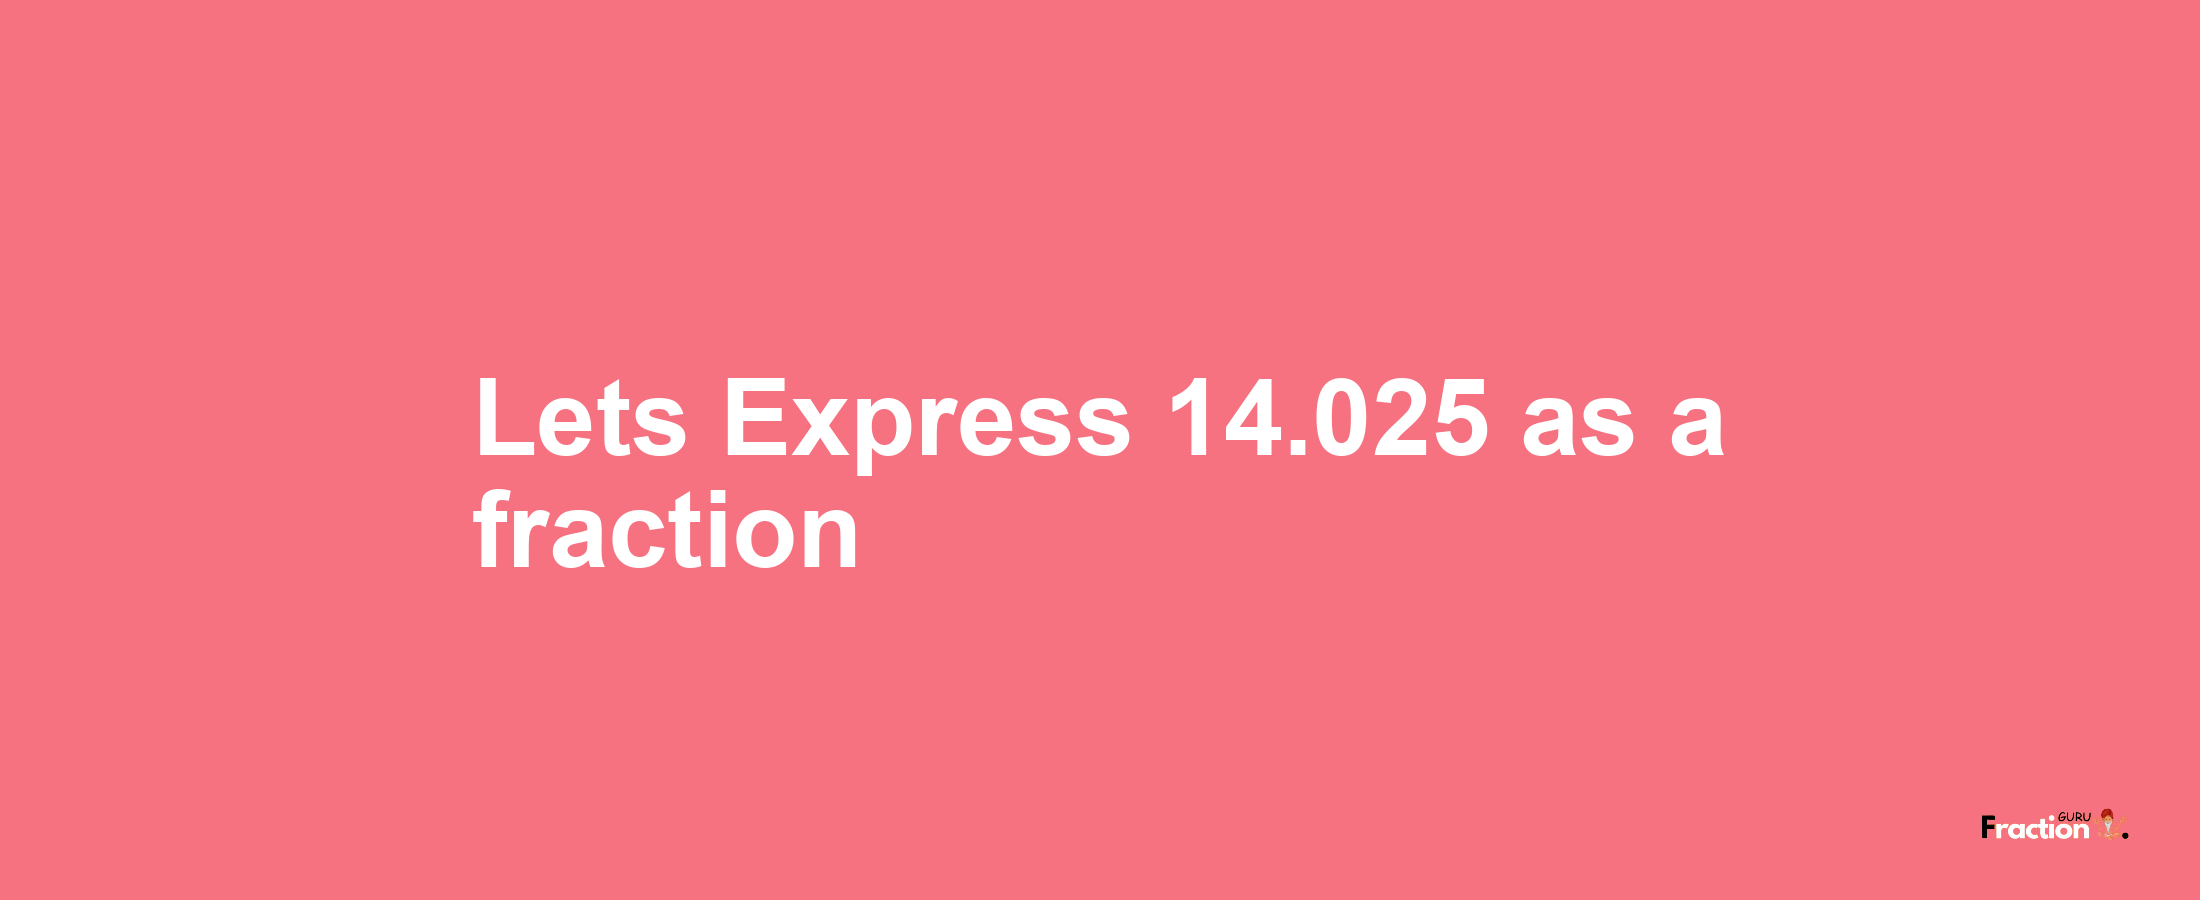 Lets Express 14.025 as afraction